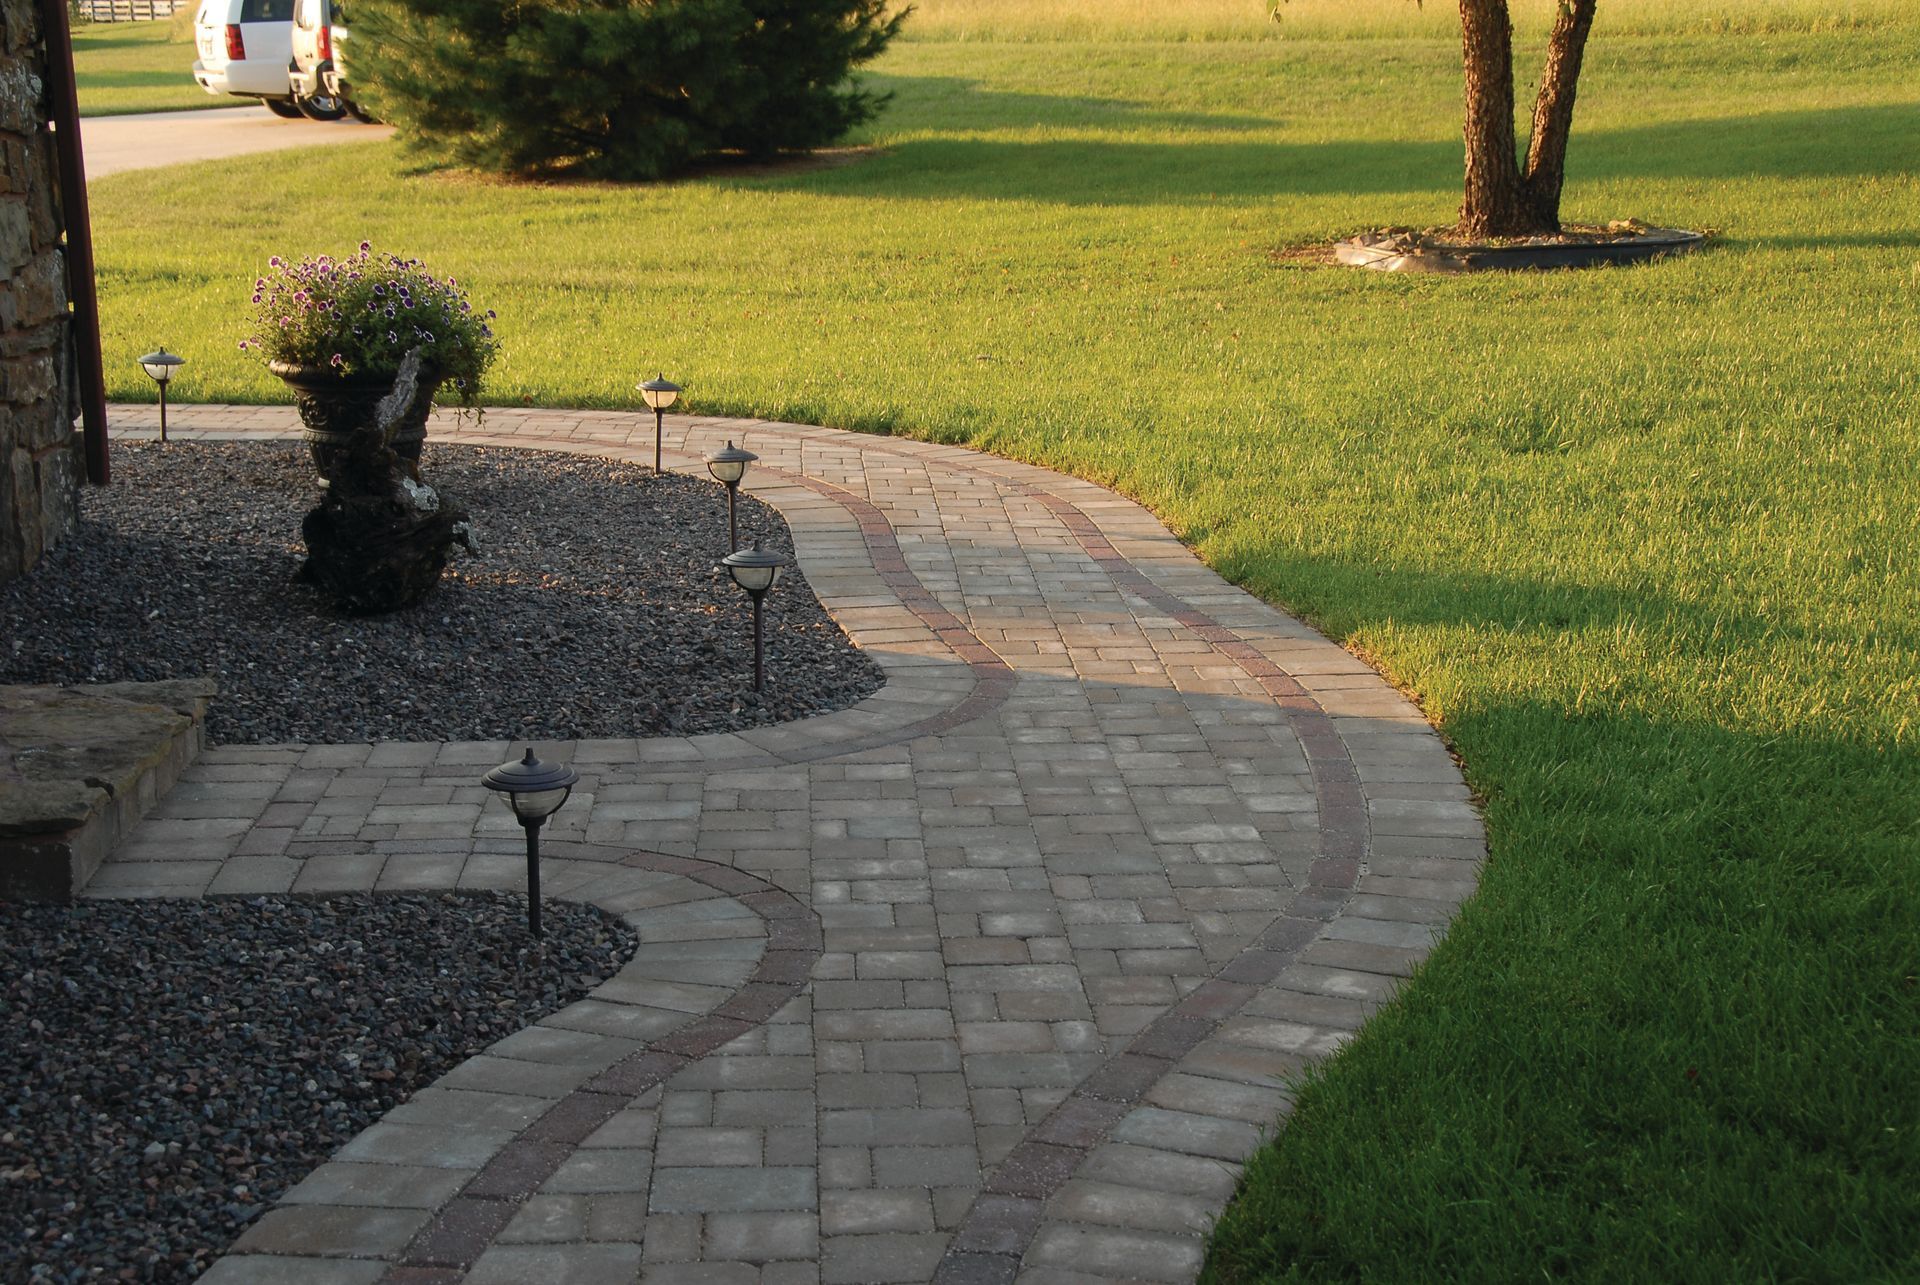 Achieve a Rustic Outdoor Patio Ambiance Using Stockman Stoneworks’ Aged Cordobay Pavers.